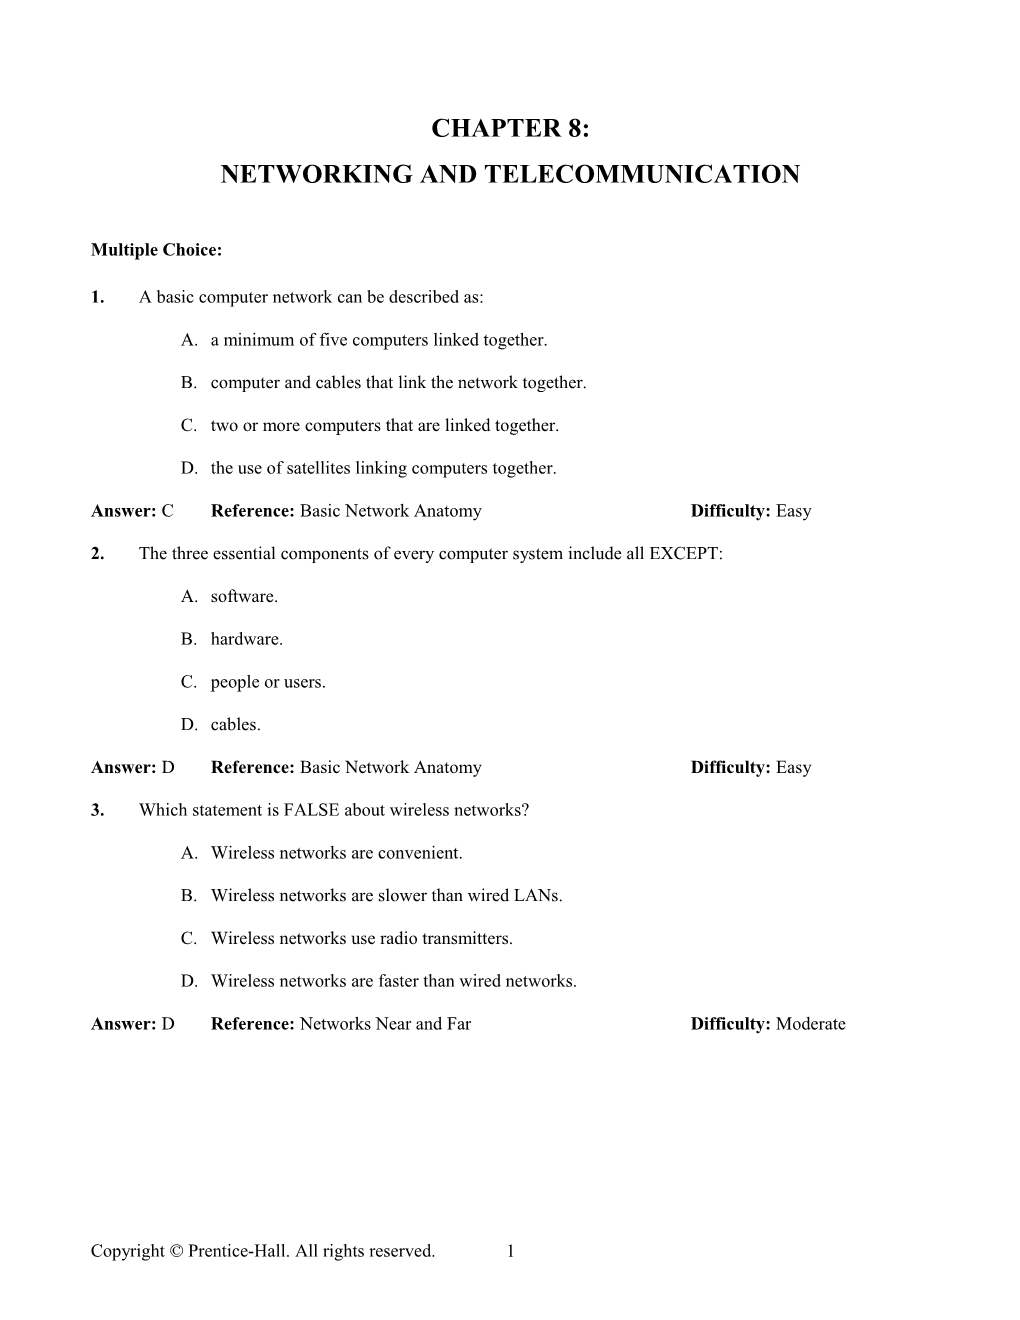 Chaper 8: Networking And Telecommunications